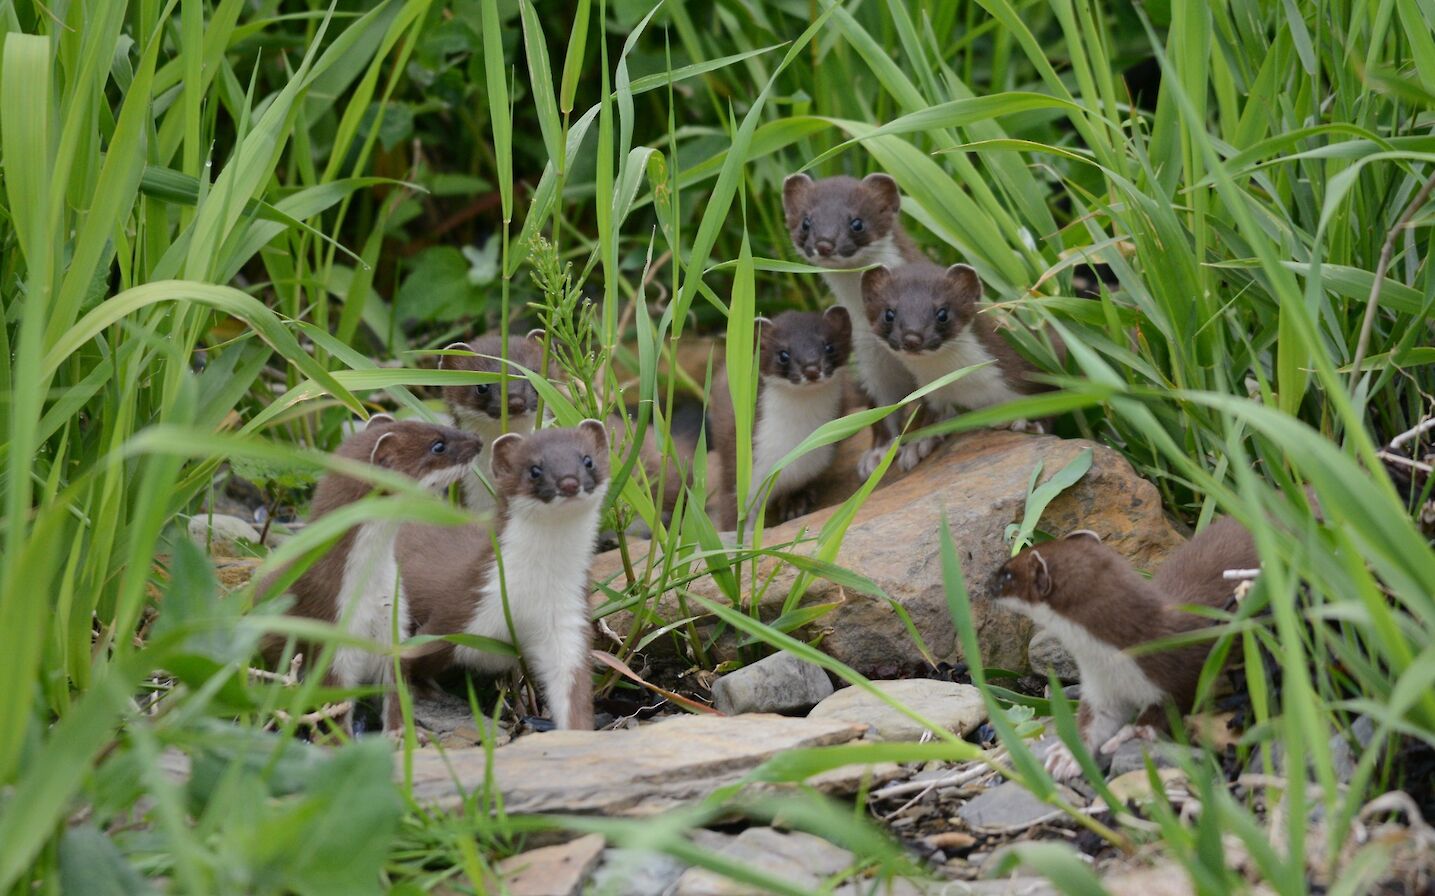 Stoat family in Orkney - image by Nick Card